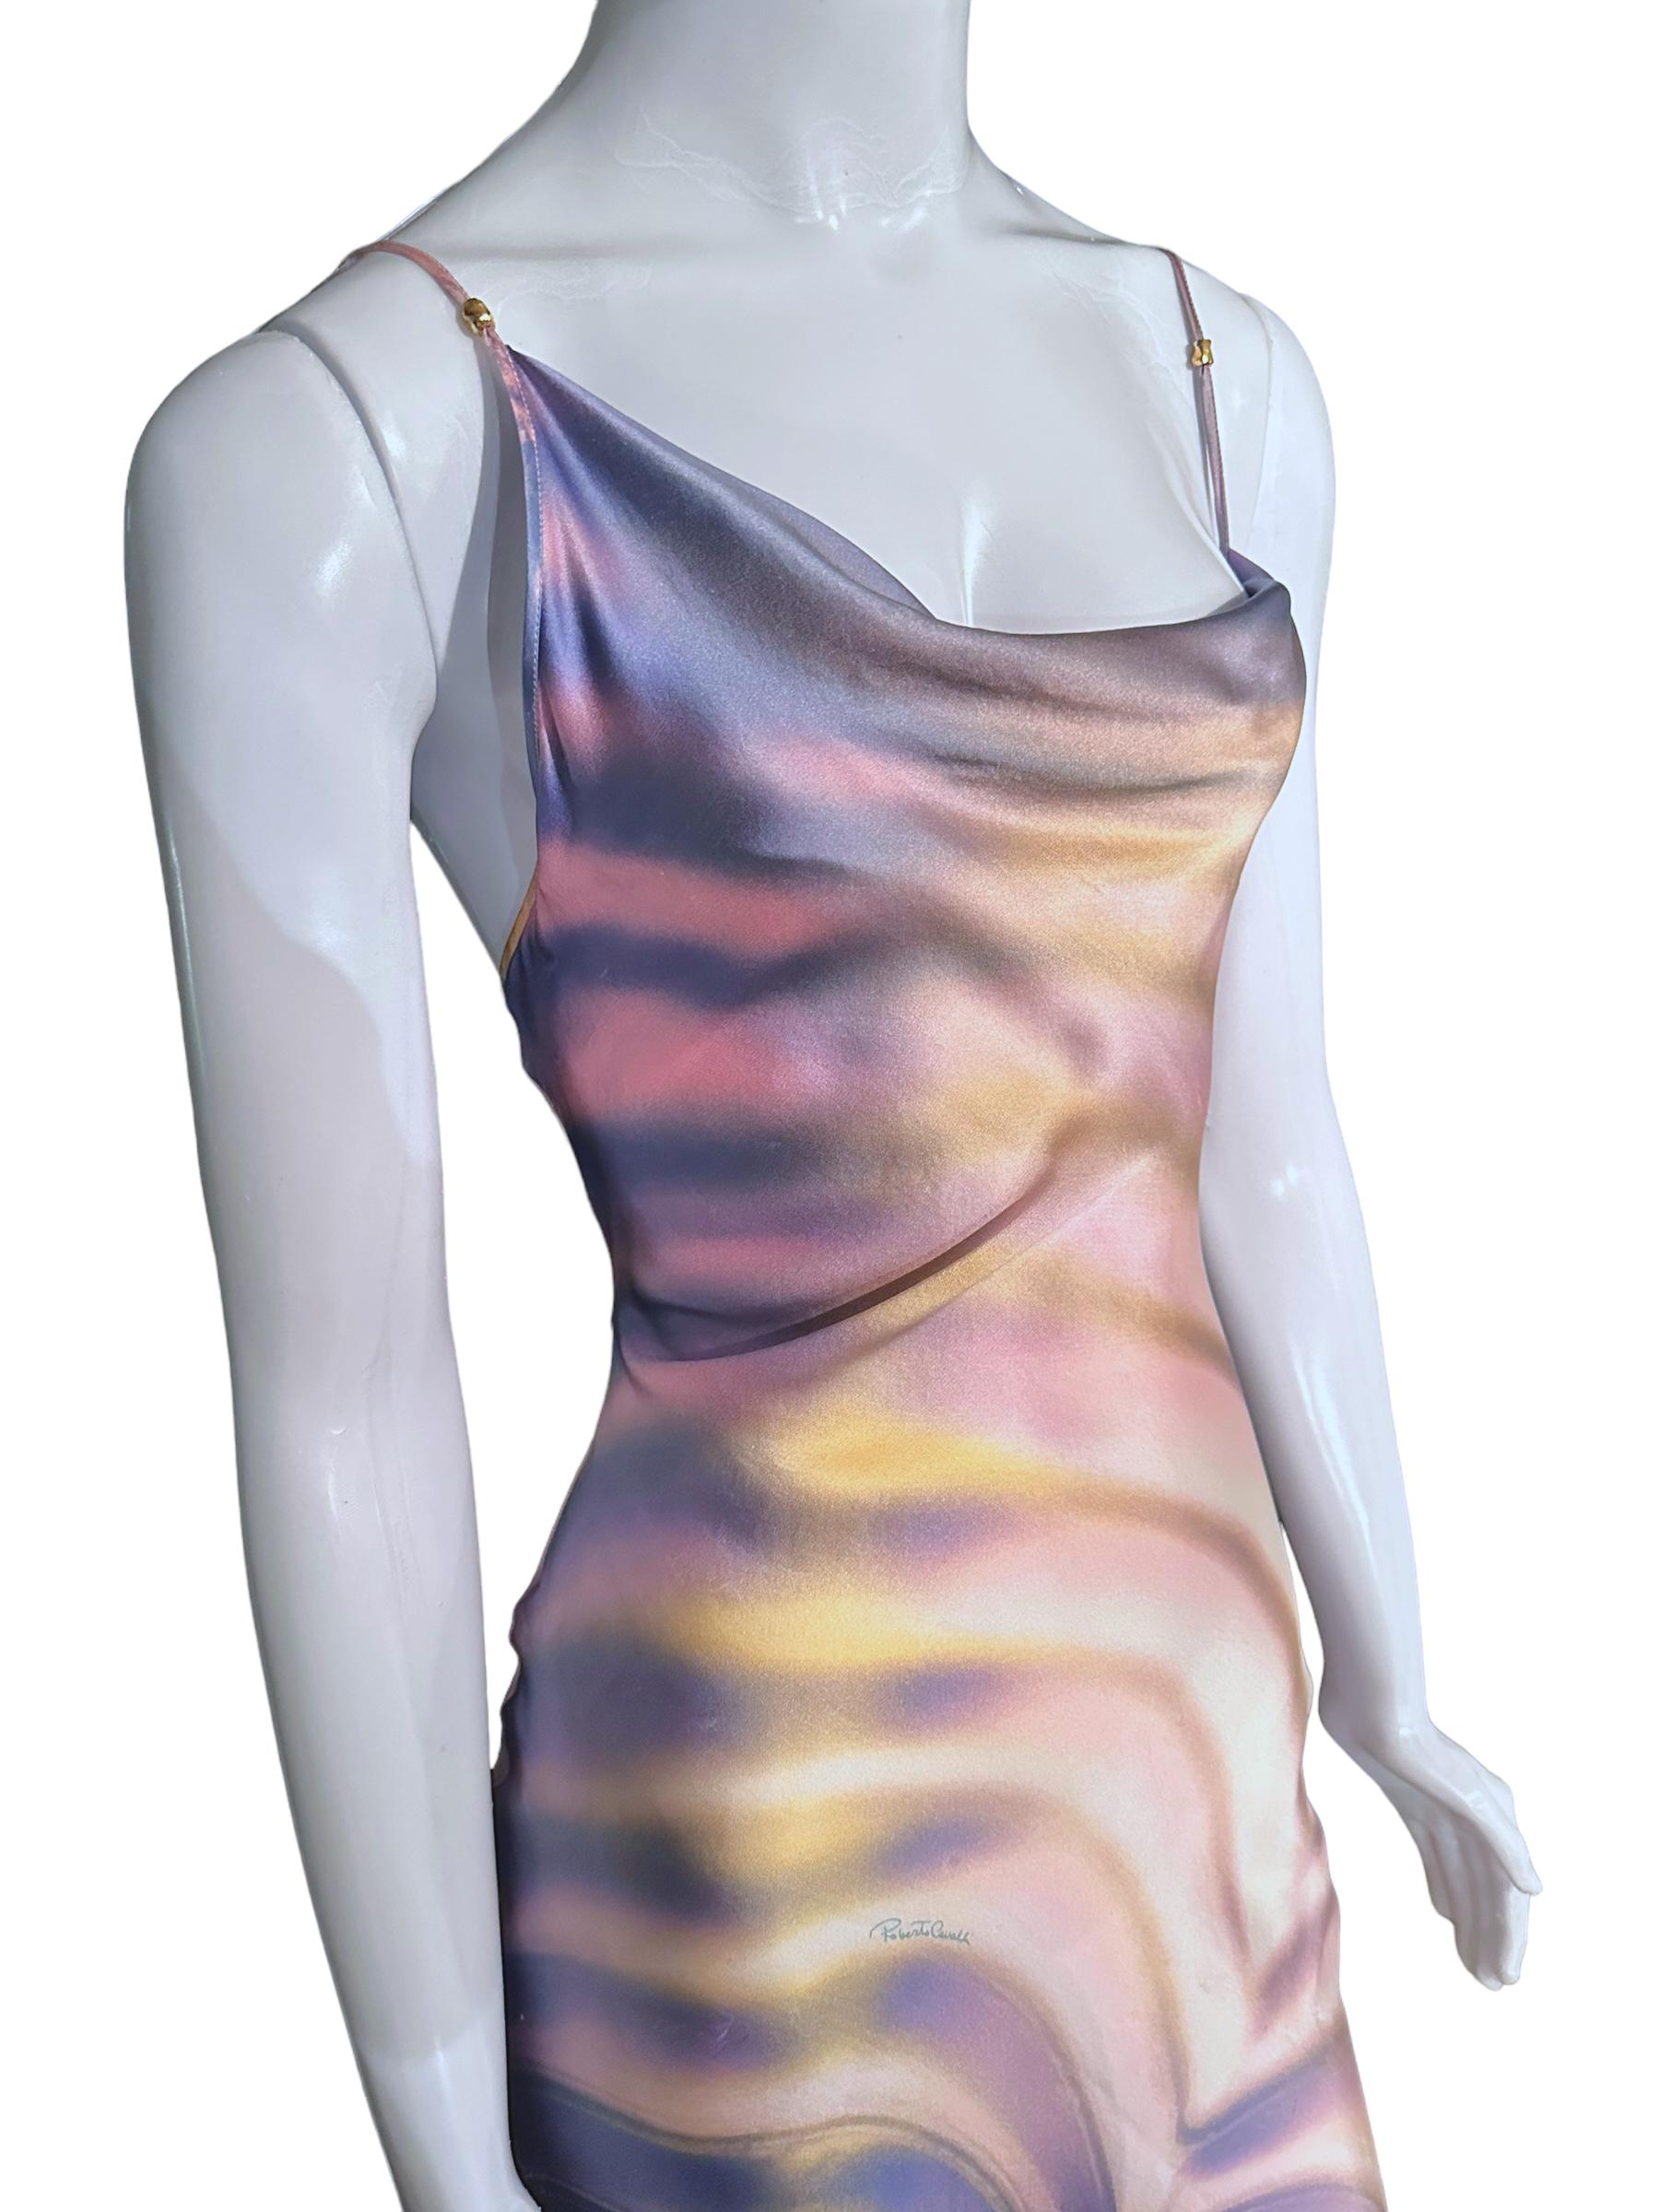 Roberto Cavalli Iconic Ss 2001 Psychedelic Print Cowl Neck Bias-Cut Silk Dress For Sale 4